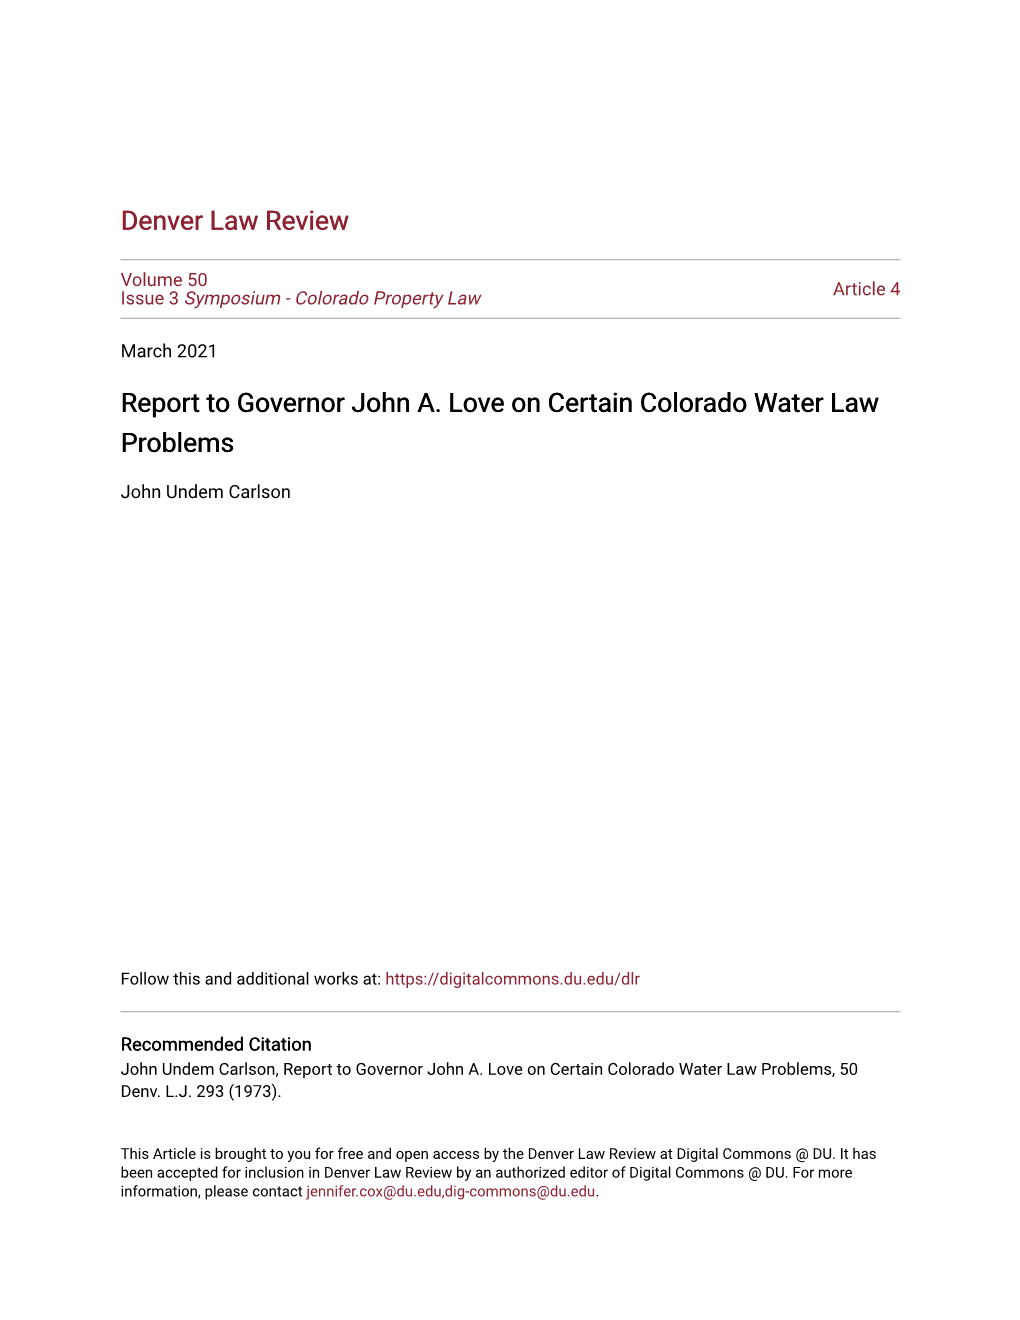 Report to Governor John A. Love on Certain Colorado Water Law Problems